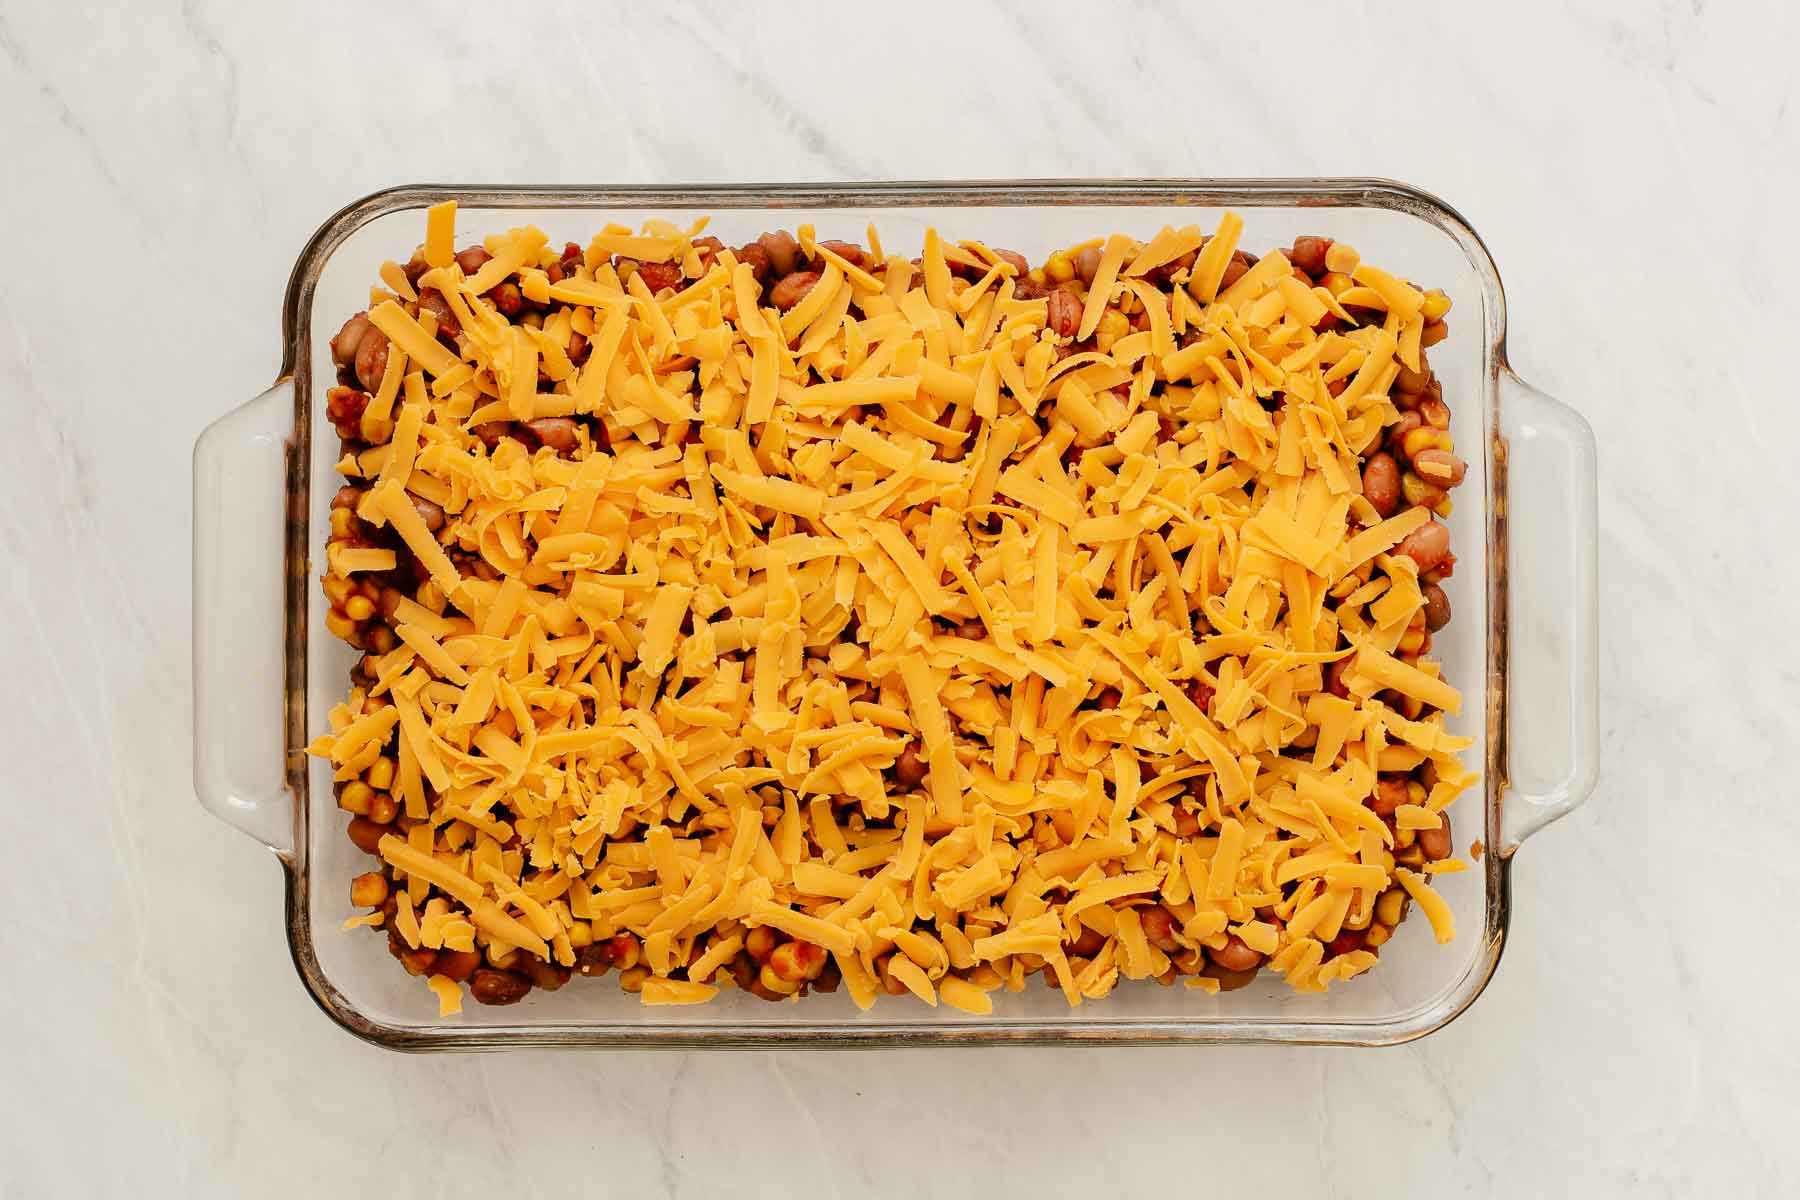 Pinto bean casserole in glass dish covered with shredded yellow cheese.